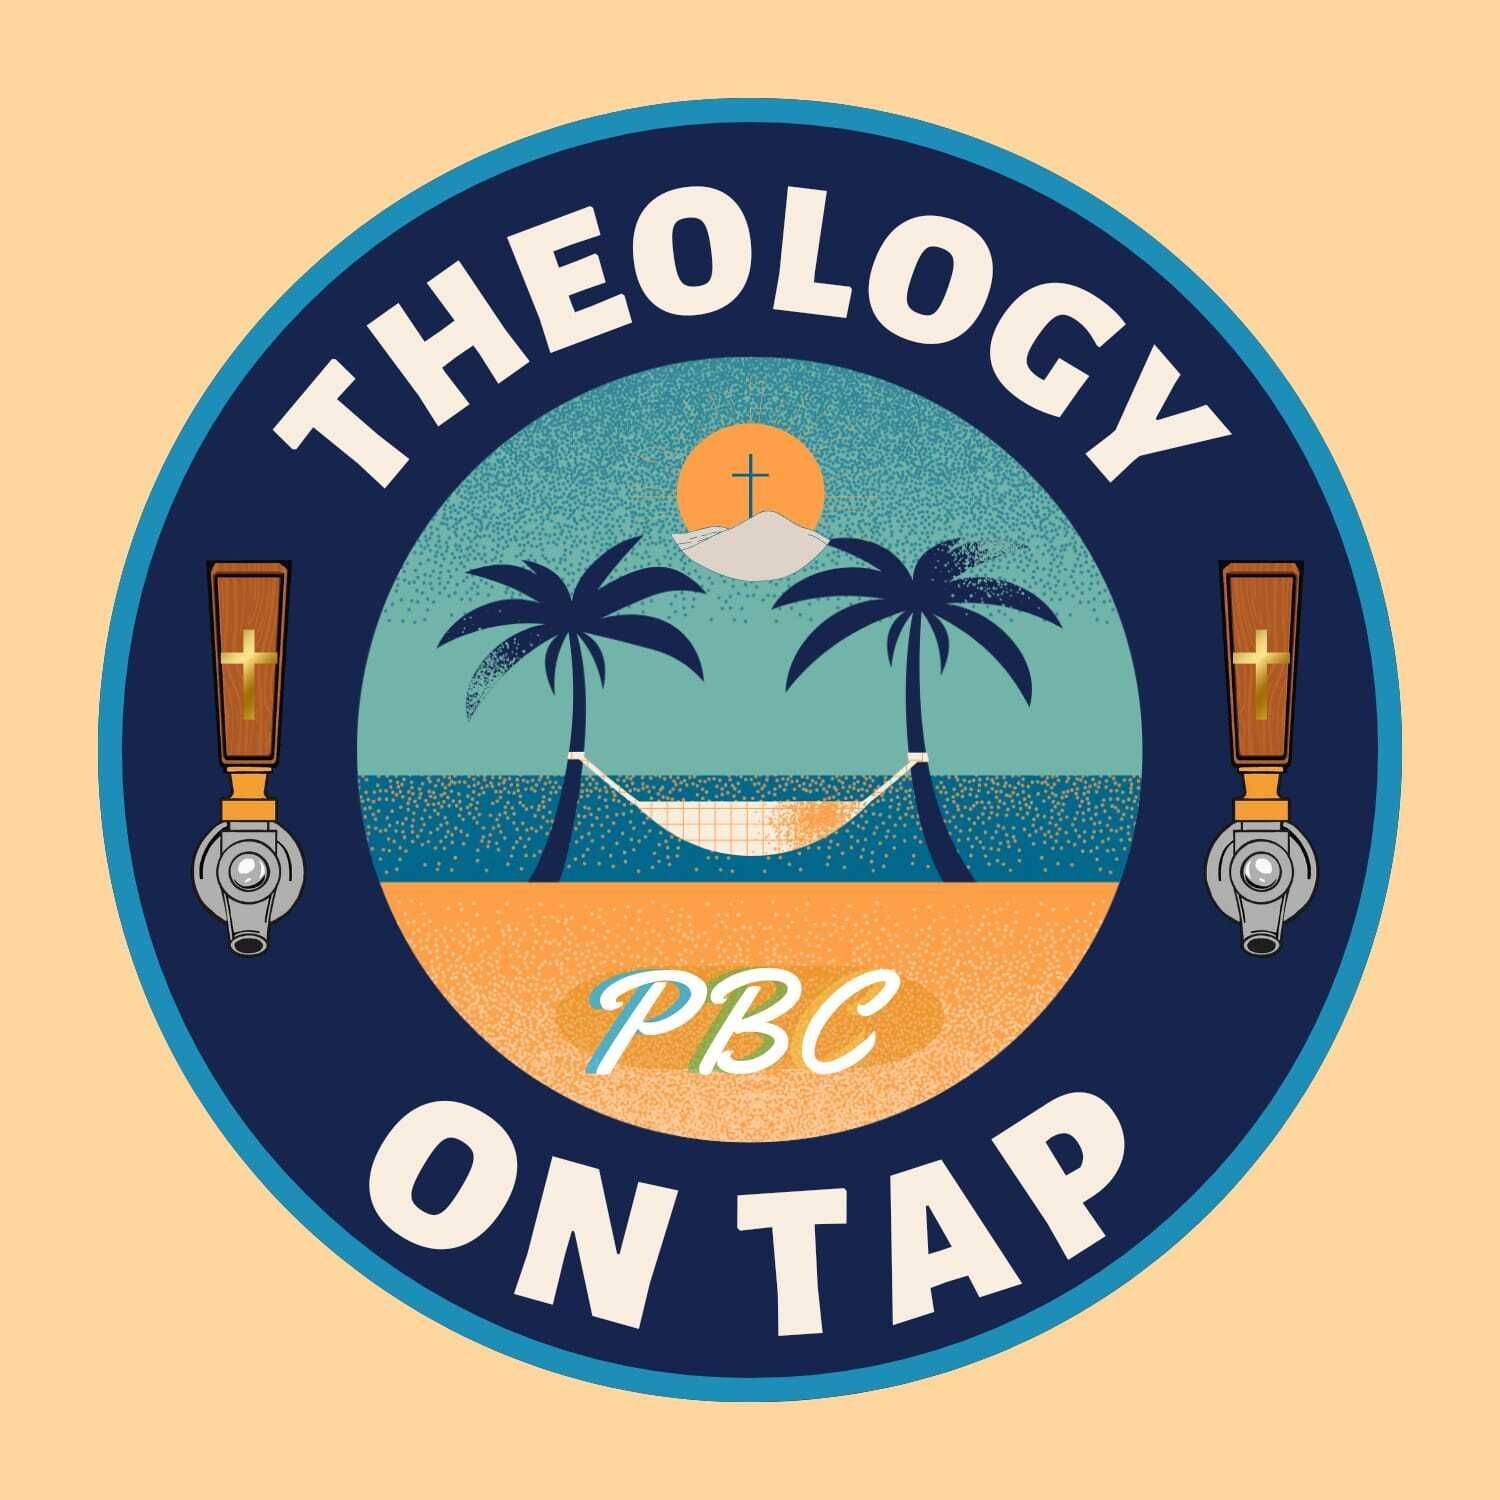 Theology on Tap